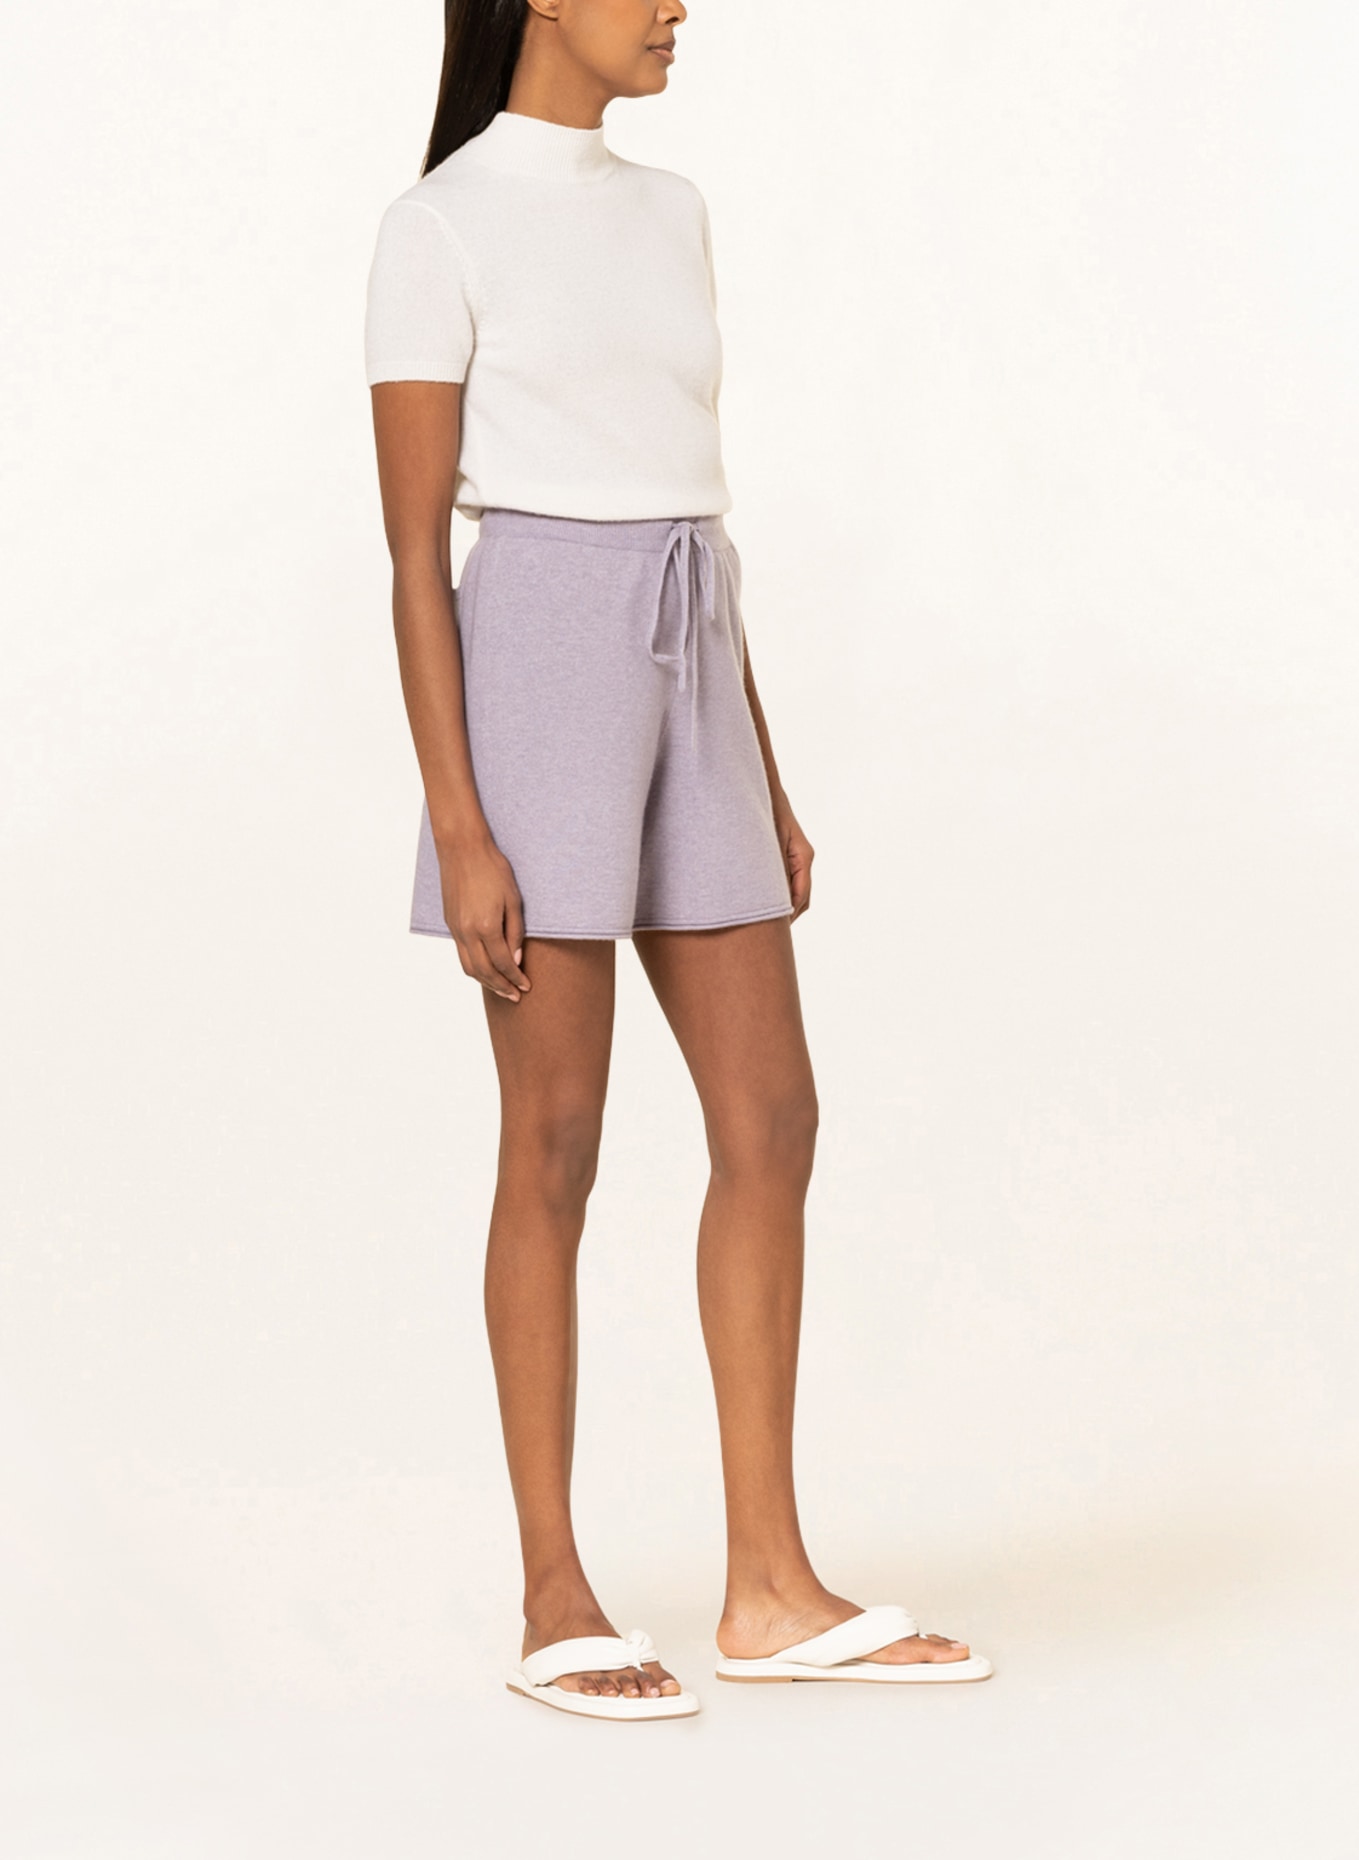 (THE MERCER) N.Y. Knit shorts with merino wool, Color: LIGHT PURPLE (Image 4)